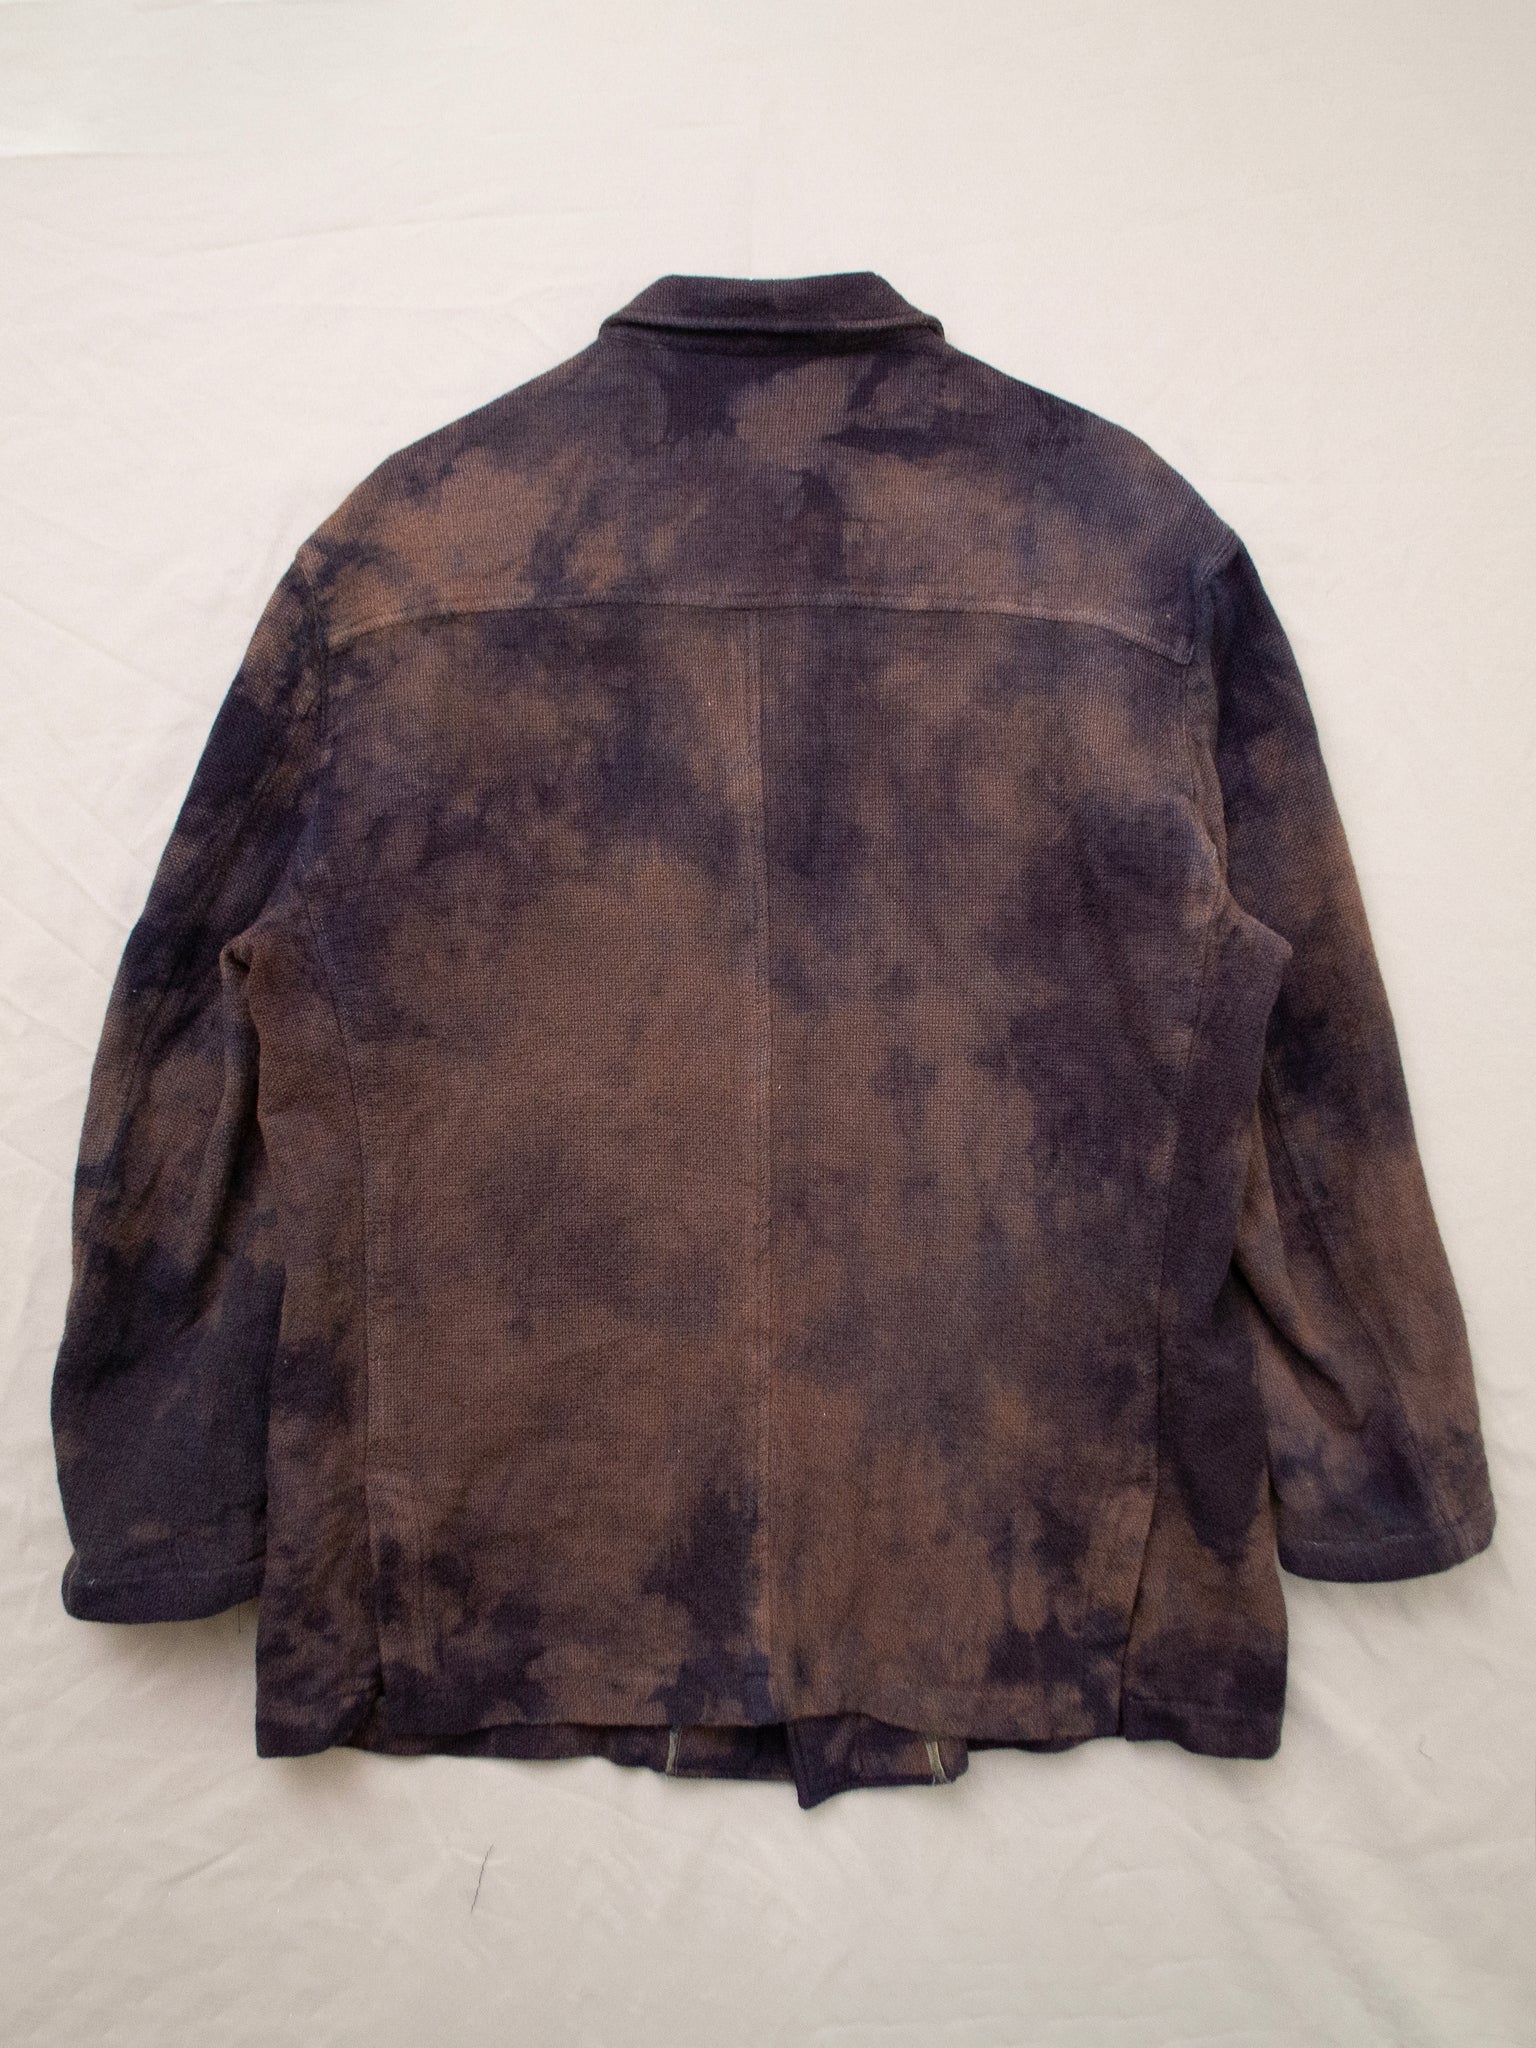 Over-Dyed 1970s Oversized Linen Field Jacket (Unisex US M/L)